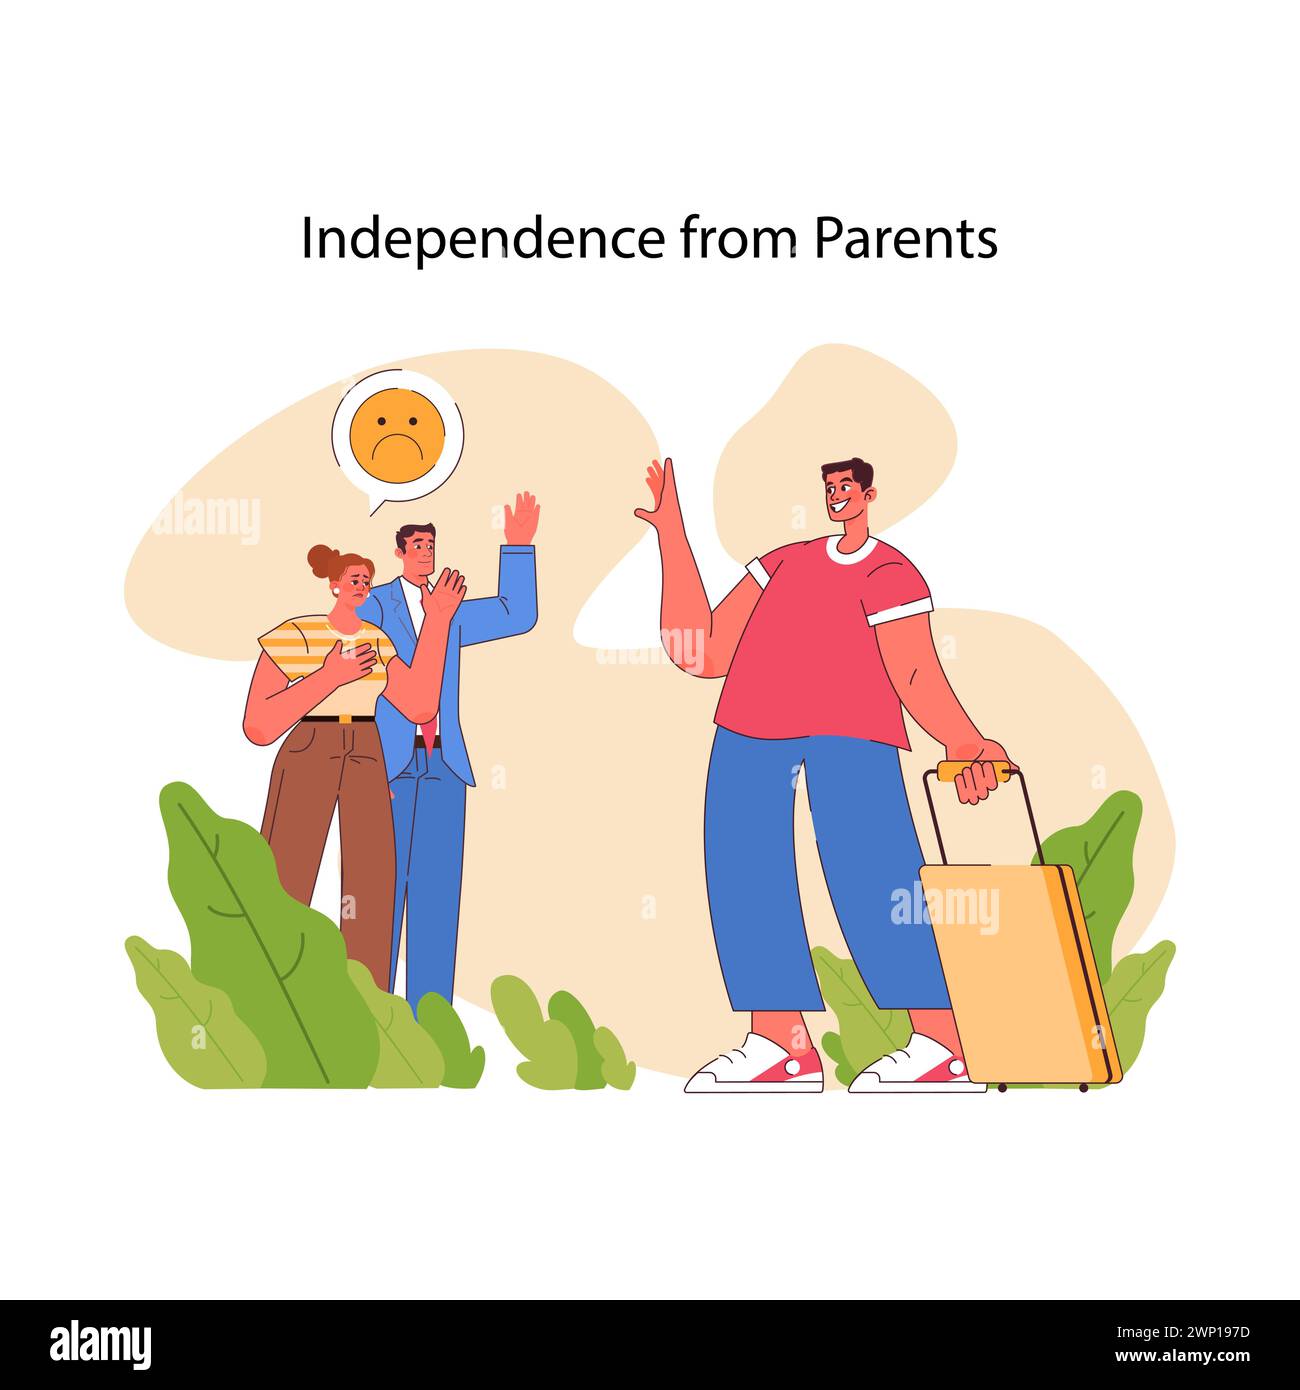 Leaving the Nest concept. A young adult departs for a new journey, signifying the pivotal moment of gaining independence from caring yet anxious parents. Flat vector illustration Stock Vector